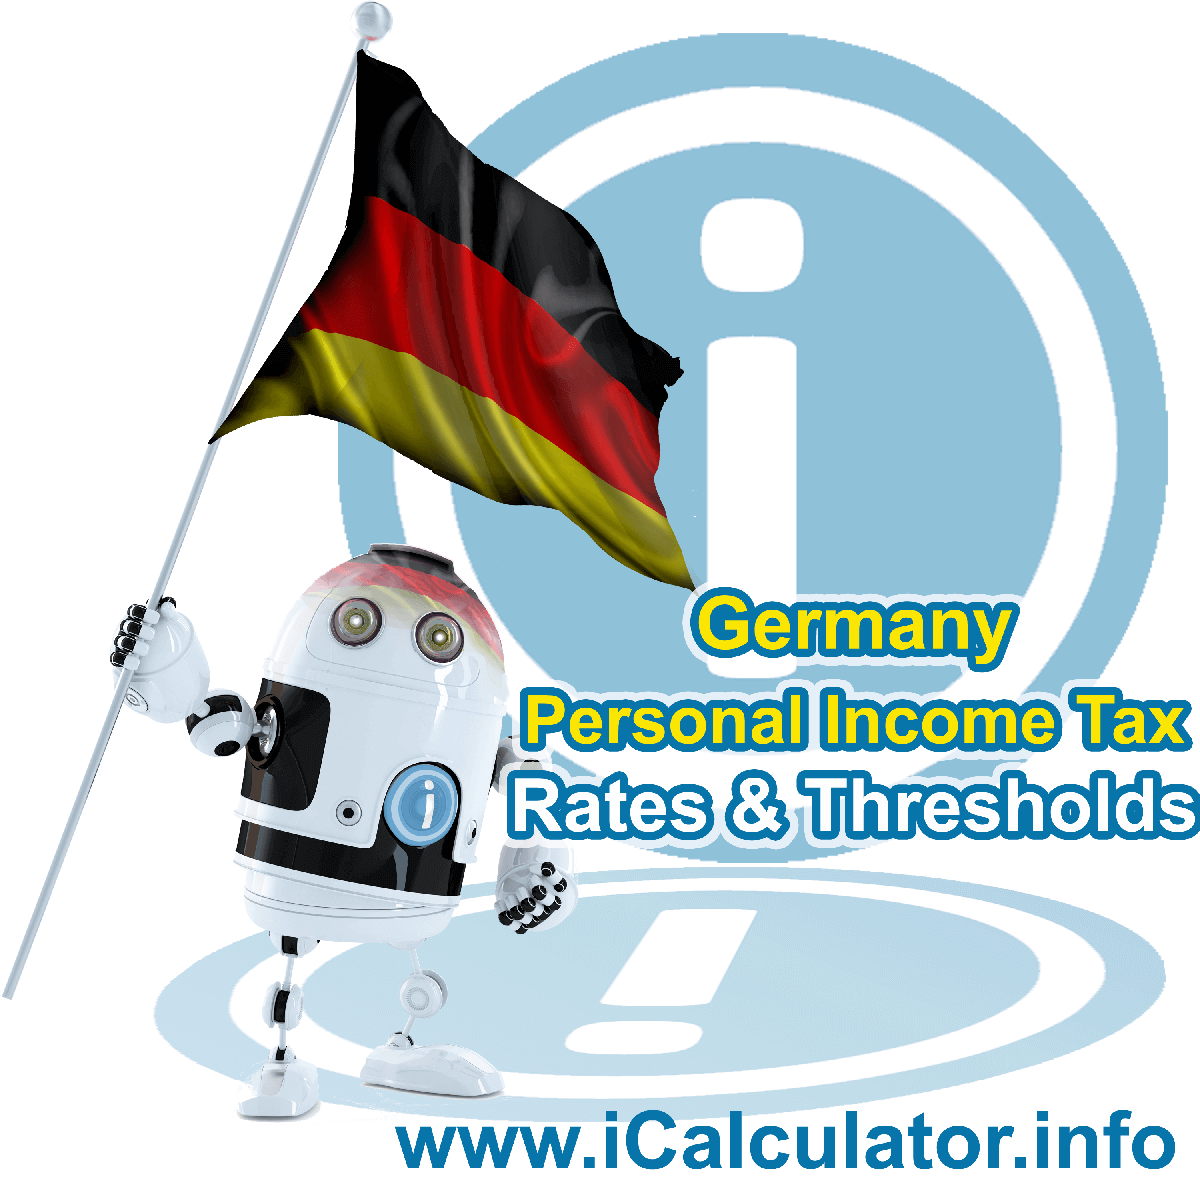 Germany Salary Calculator. This image shows the Germany flag and information relating to the tax formula for the Germany Tax Calculator